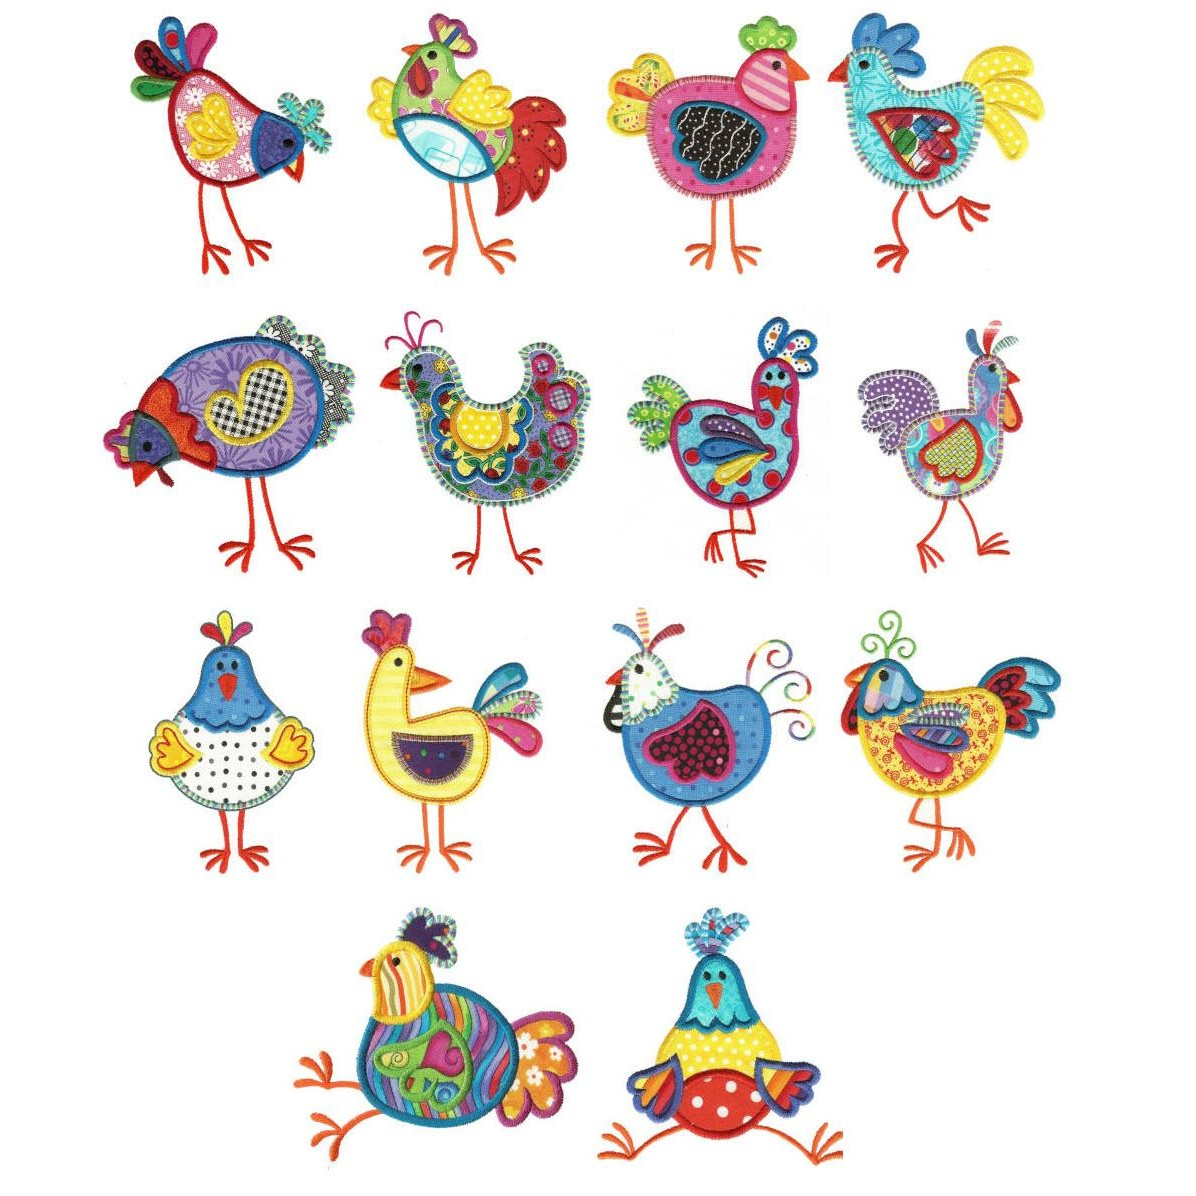 Chicken Embroidery Patterns 16 Applique Machine Embroidery Designs Images Free Applique Flower